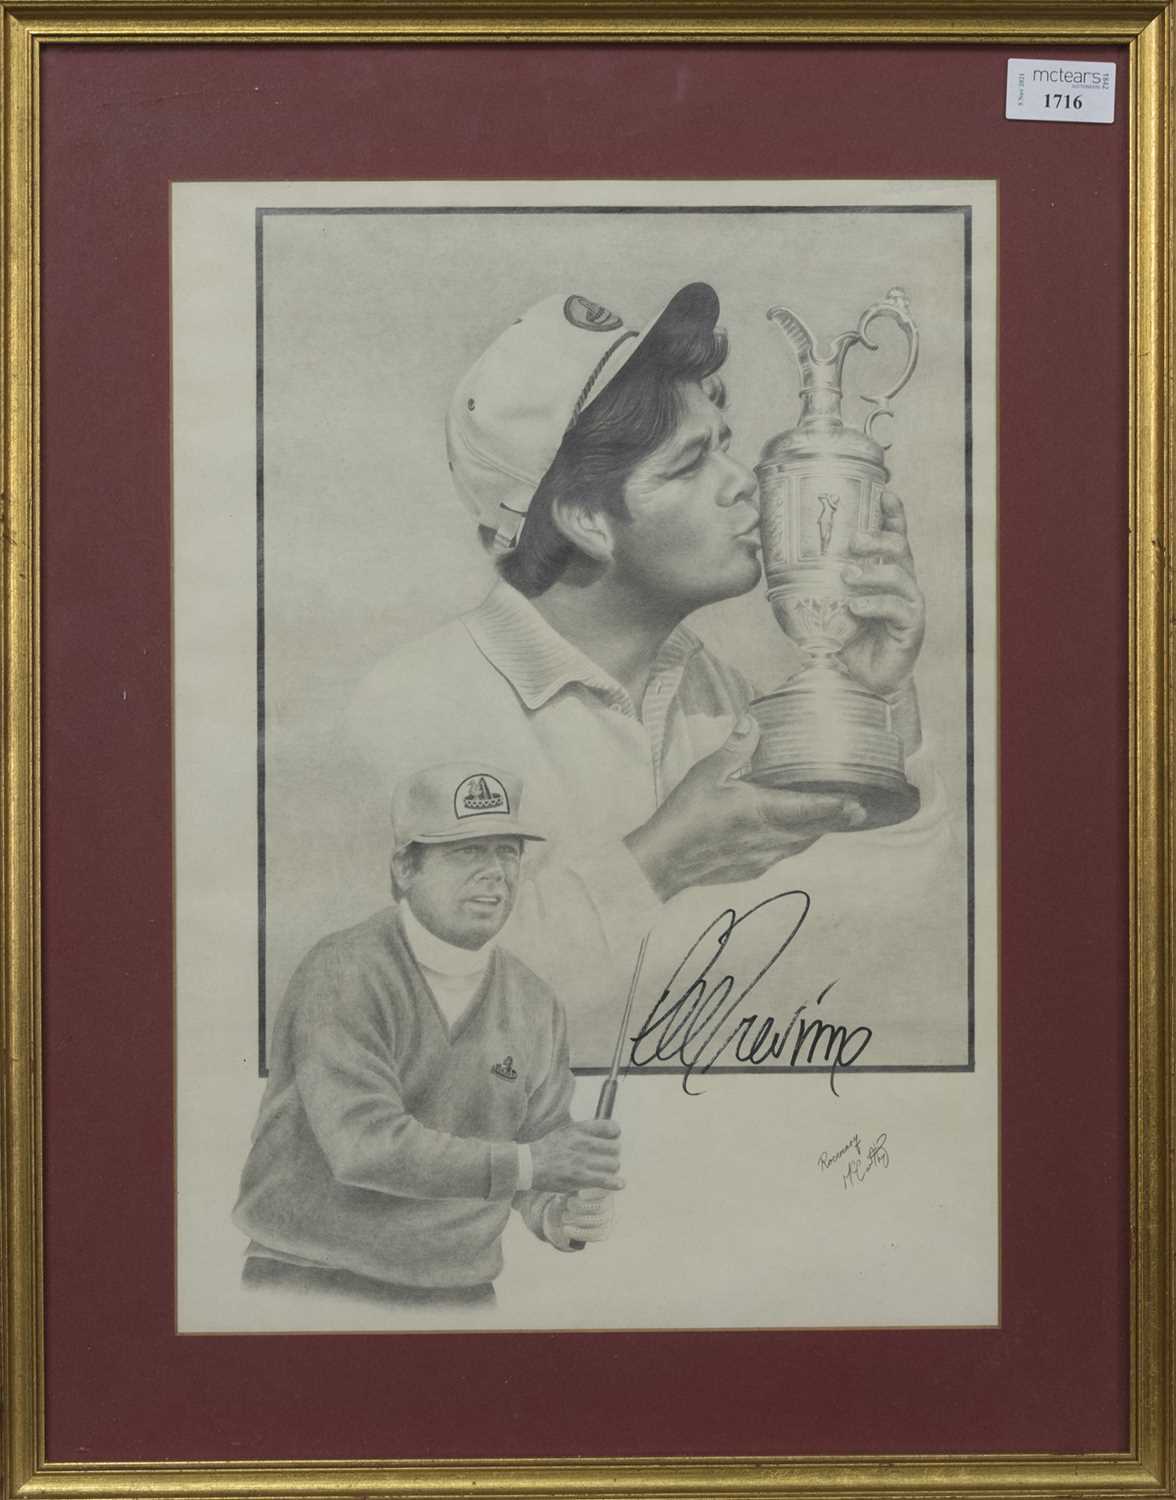 Lot 1716 - AN AUTOGRAPHED PRINT OF LEE TREVINO